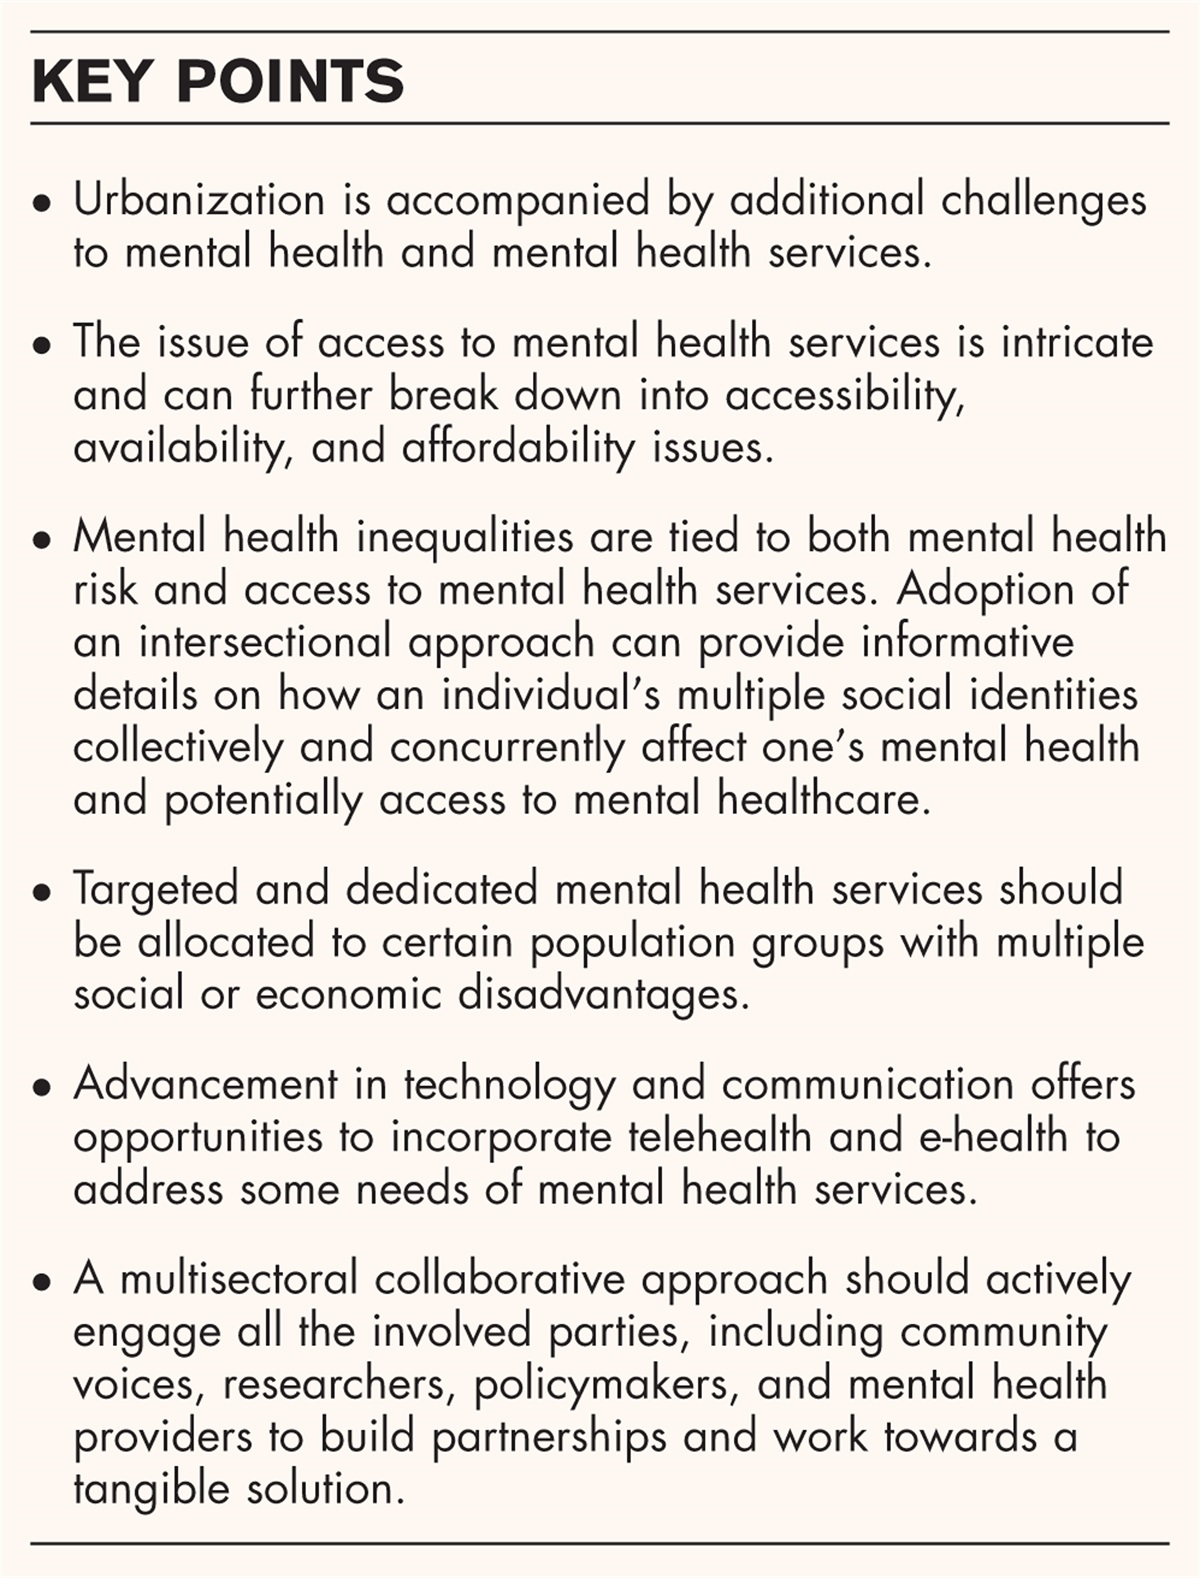 Access to mental health services in urban areas: examine the availability, affordability, and accessibility of mental health services in urban settings, particularly for individuals with intersecting marginalized identities